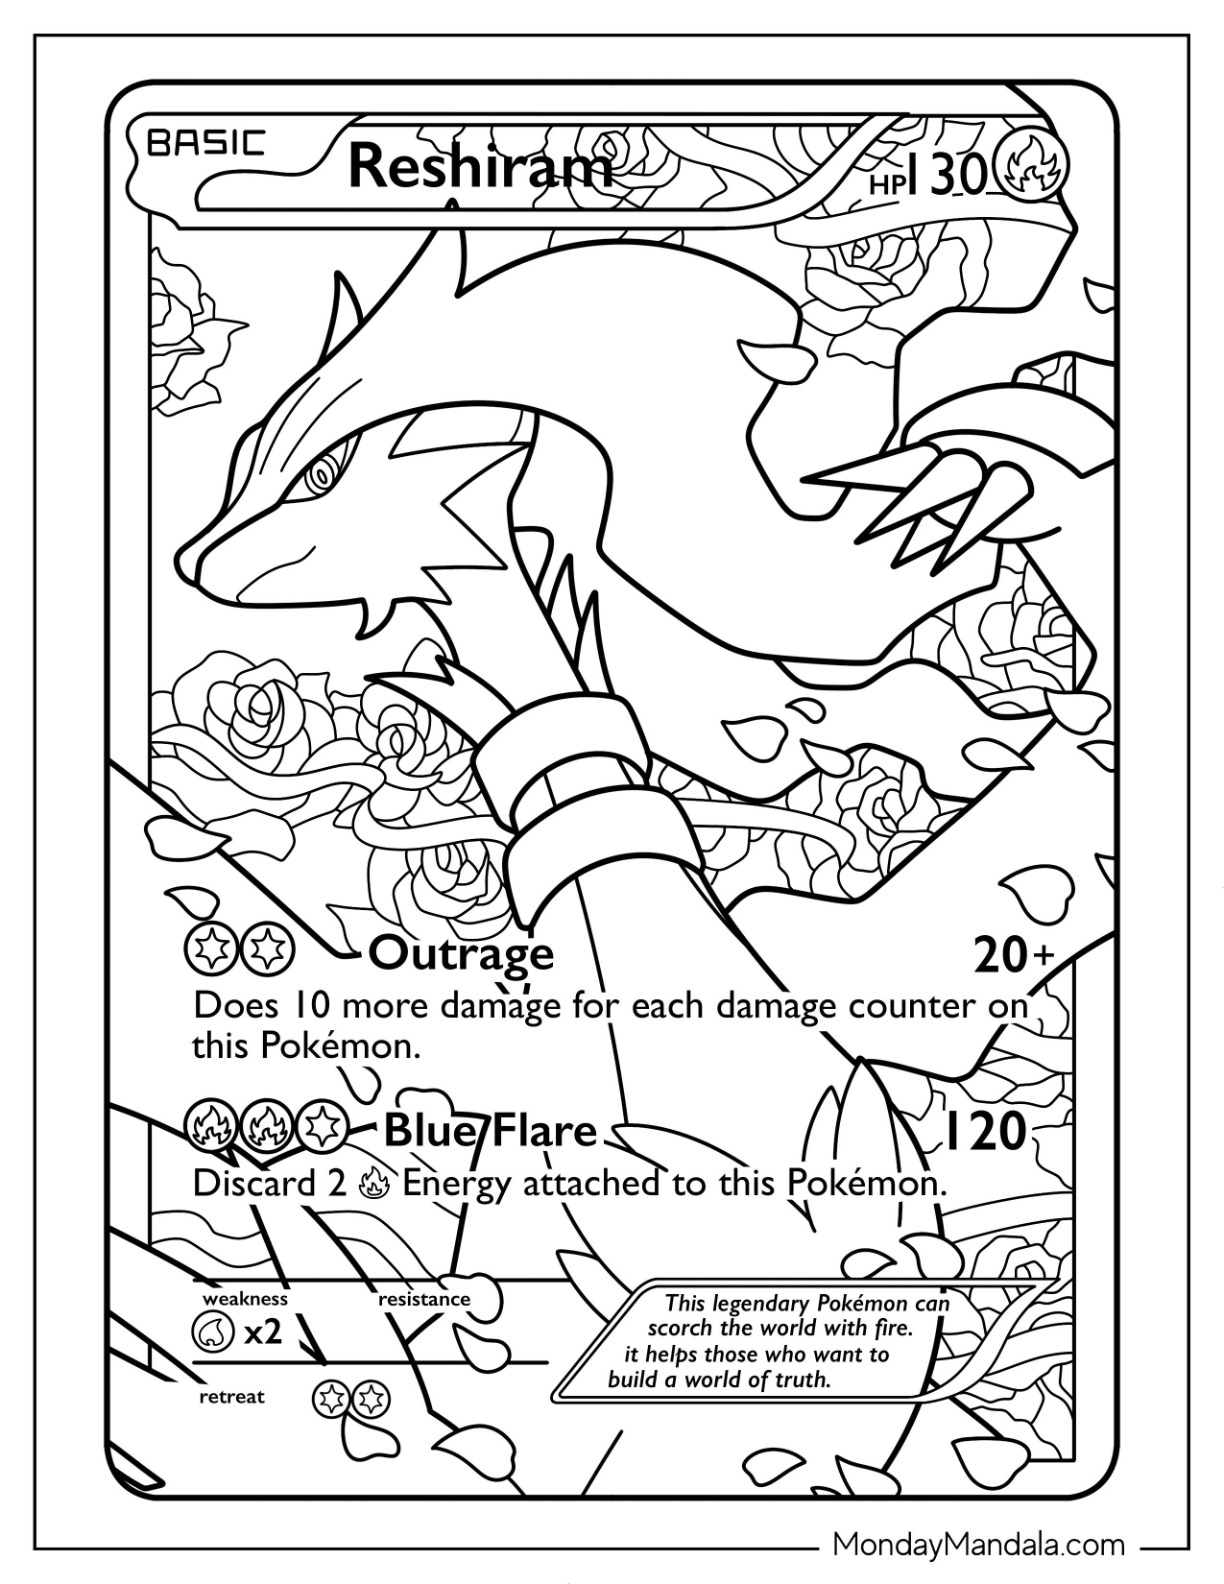 Pokemon card coloring pages free pdf printables